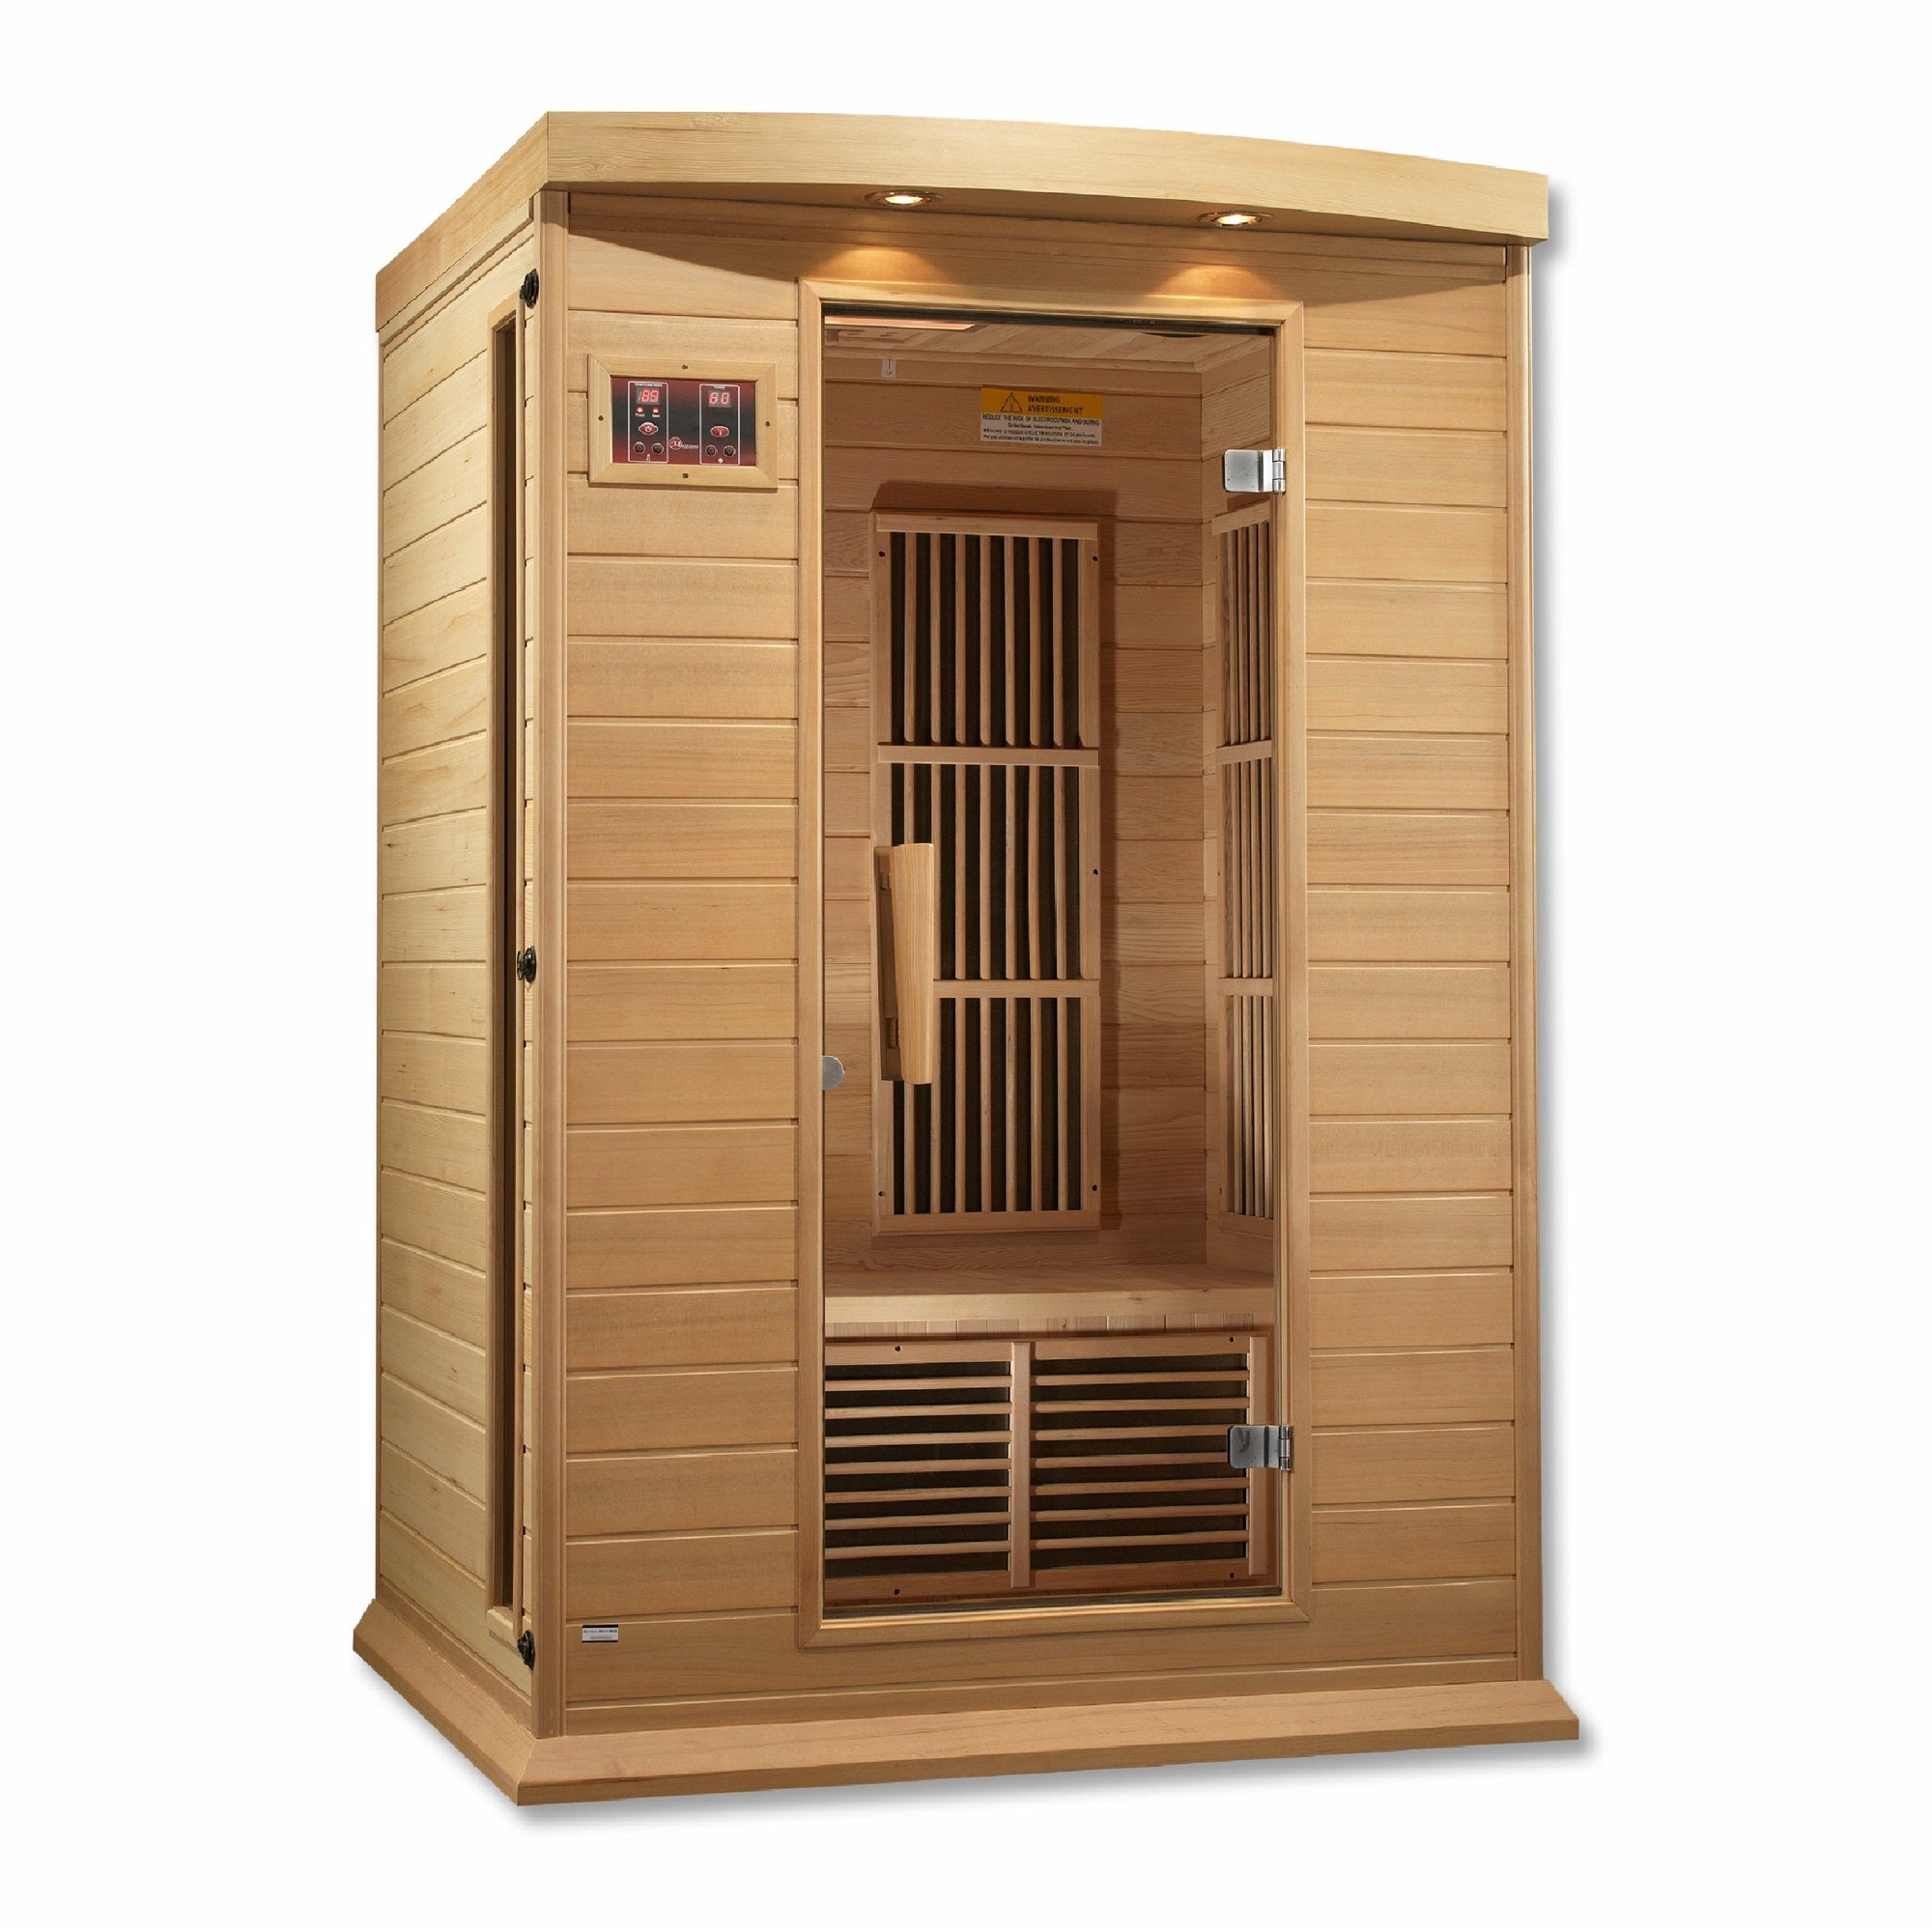 Maxxus Low EMF FAR Infrared Sauna - 2 Person - Natural hemlock wood construction with Tempered glass door and 2 full-length side windows,  Interior color therapy lighting,  Carbon heating panels, Roof vent,  Interior/exterior LED control panels,  FM Radio with BT, MP3 auxiliary, SD, and USB connection Electrical service in a white background